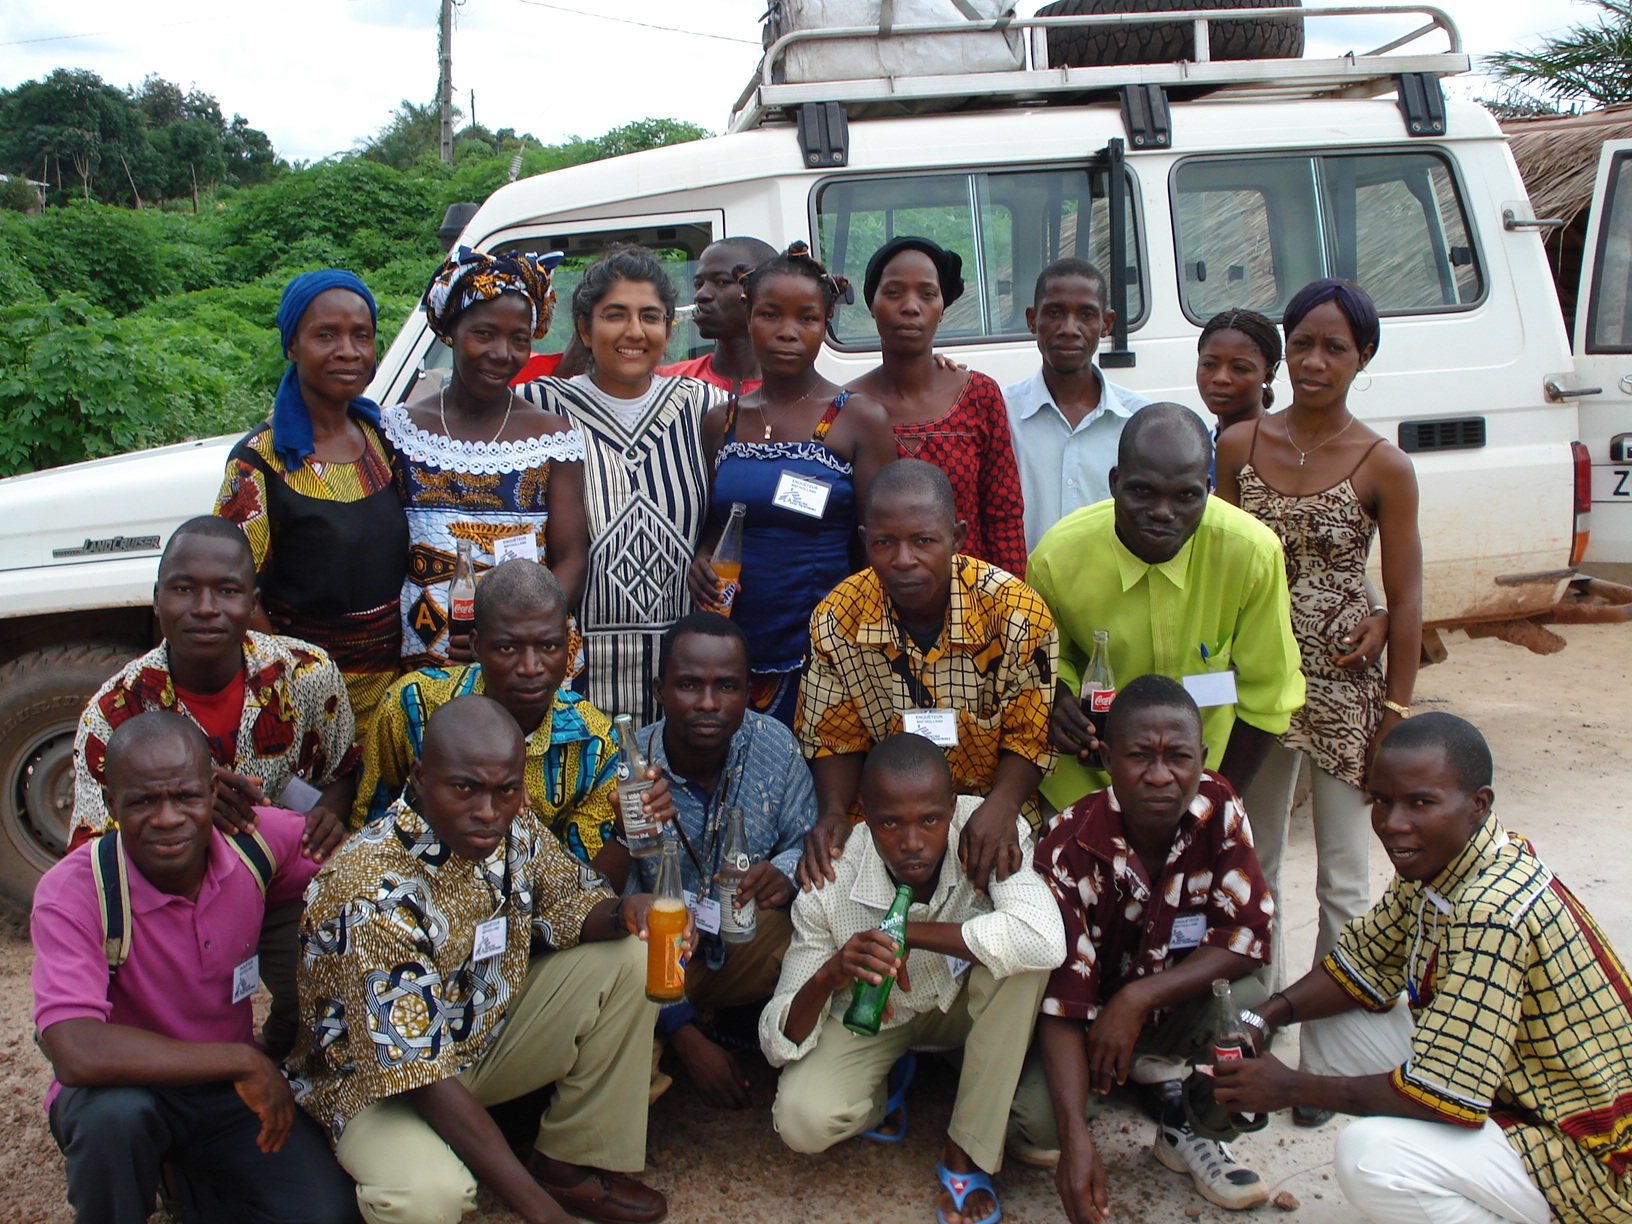 Kamalini Lokuge with a survey team in Cote d’Ivoire